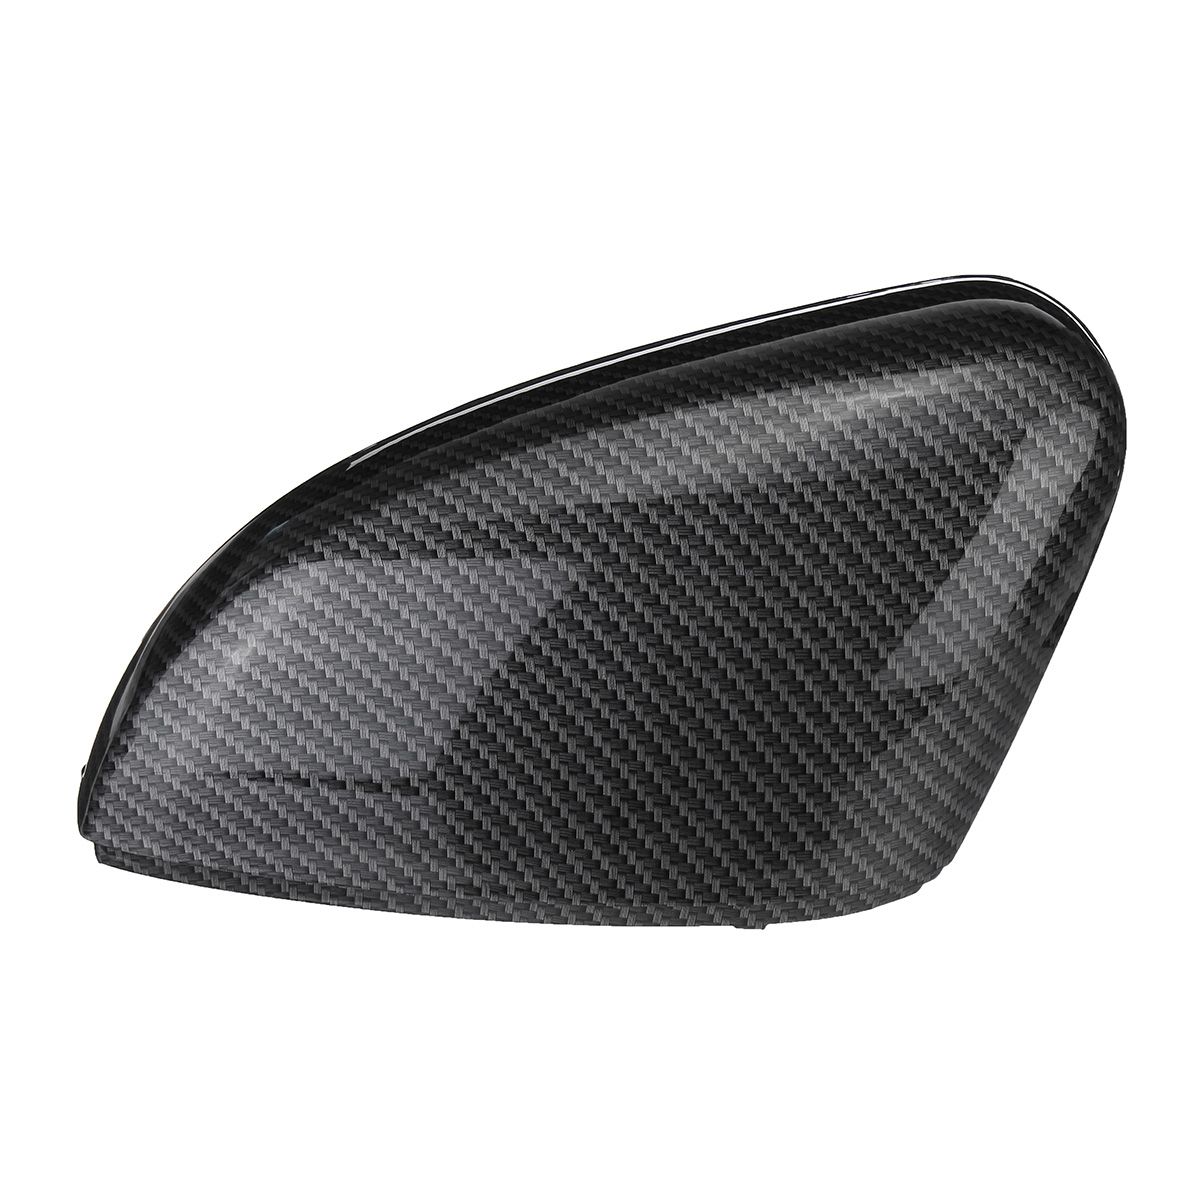 2Pcs-Carbon-Fiber-Door-Wing-Caps-Rearview-Mirror-Covers-For-VW-Polo-6R-6C-2010-2017-1659386